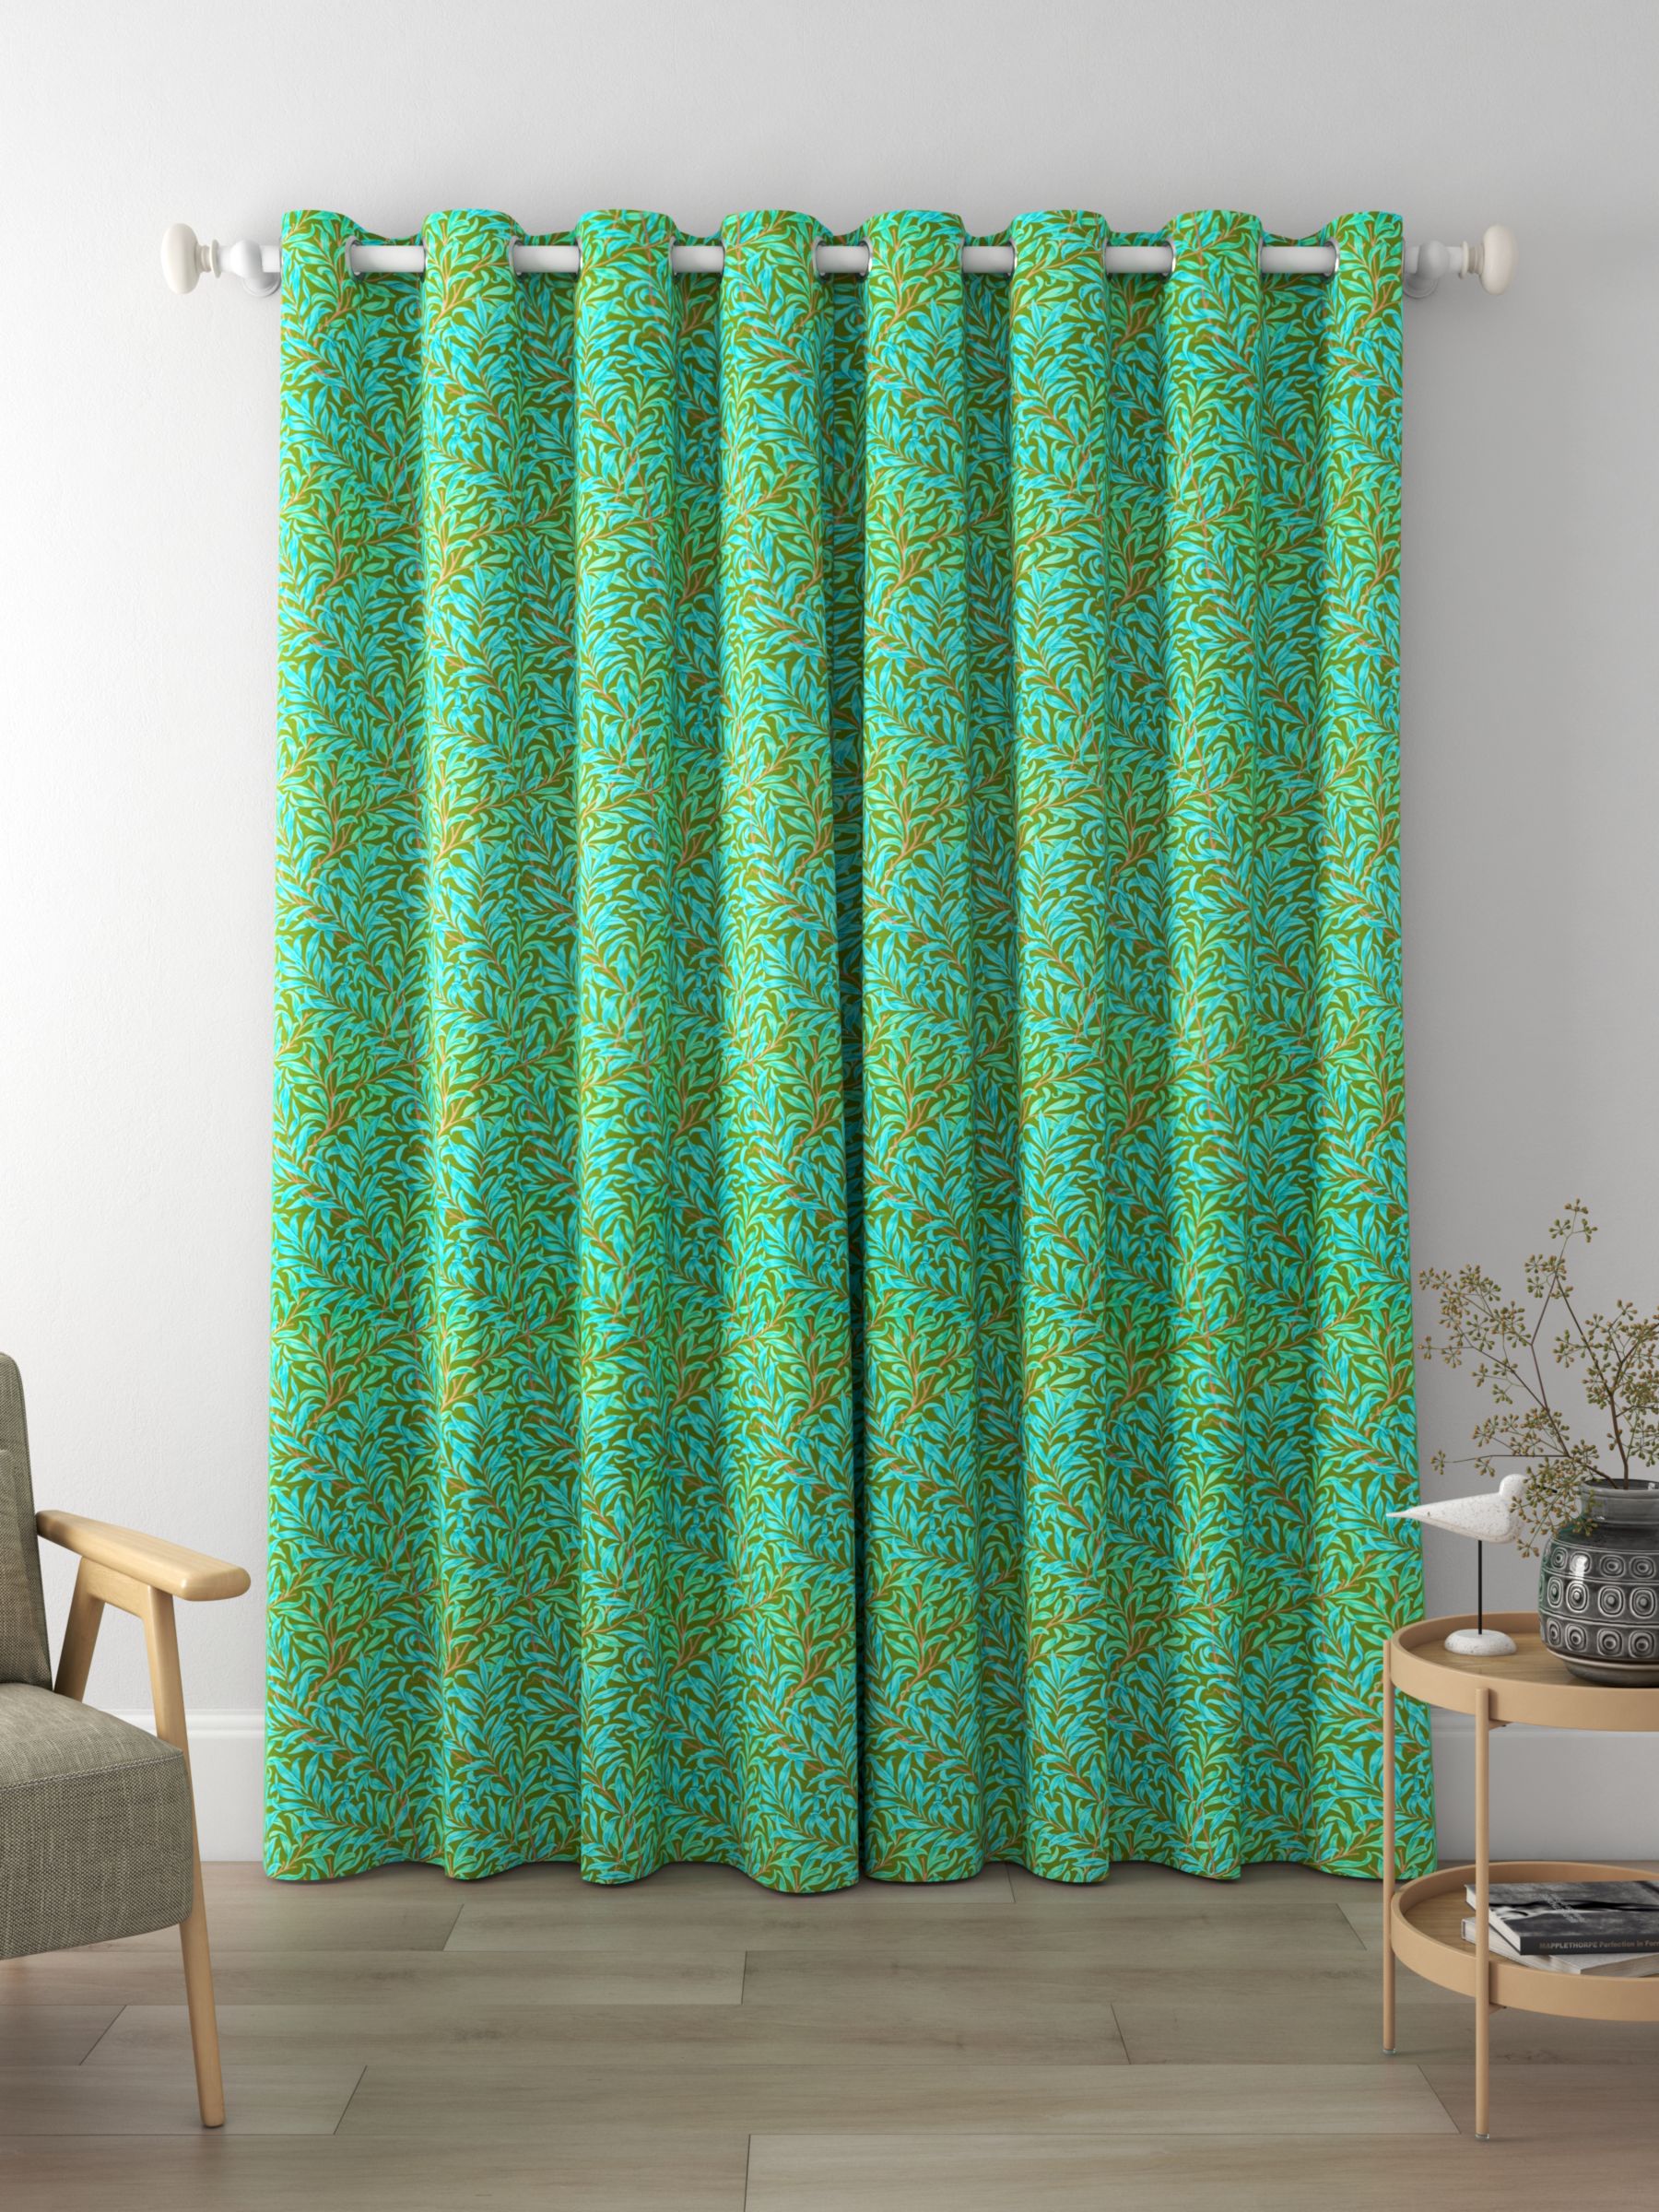 Morris & Co. Willow Boughs Made to Measure Curtains, Olive/Turquoise